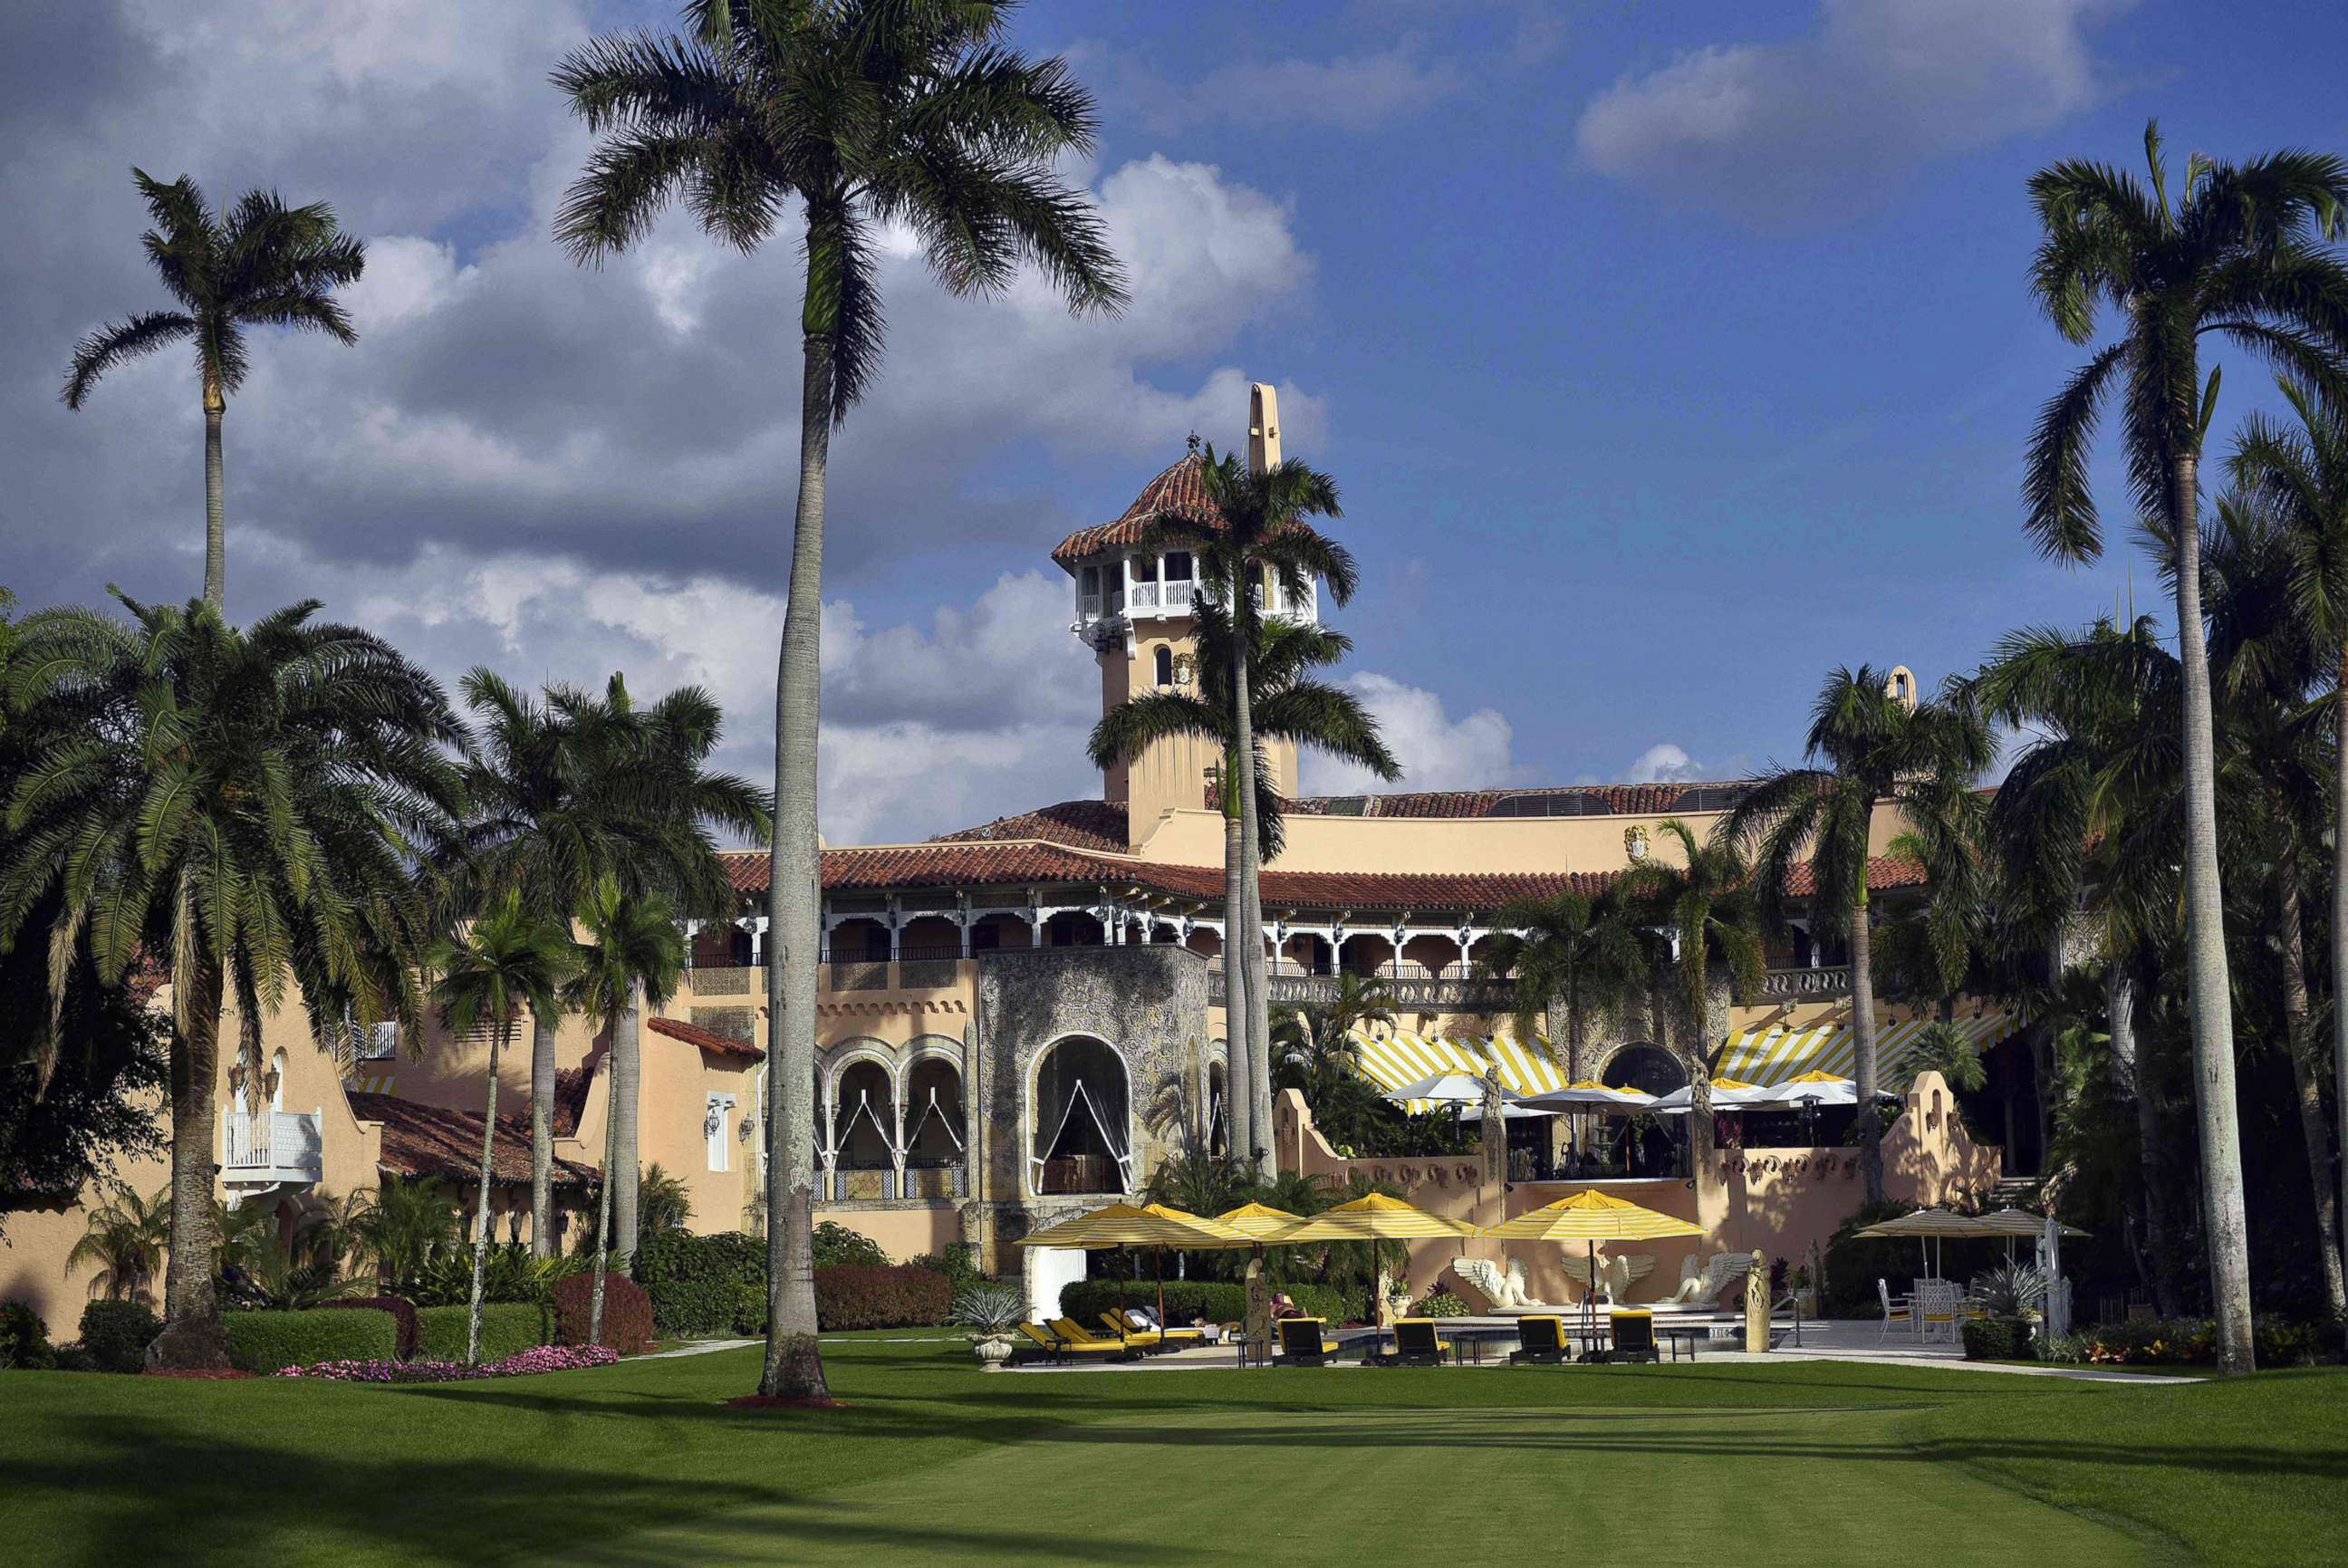 PHOTO: A general view shows the back entrance to the Mar-a-Lago estate of President-elect Donald Trump in Palm Beach, Fla., Nov. 27, 2016.